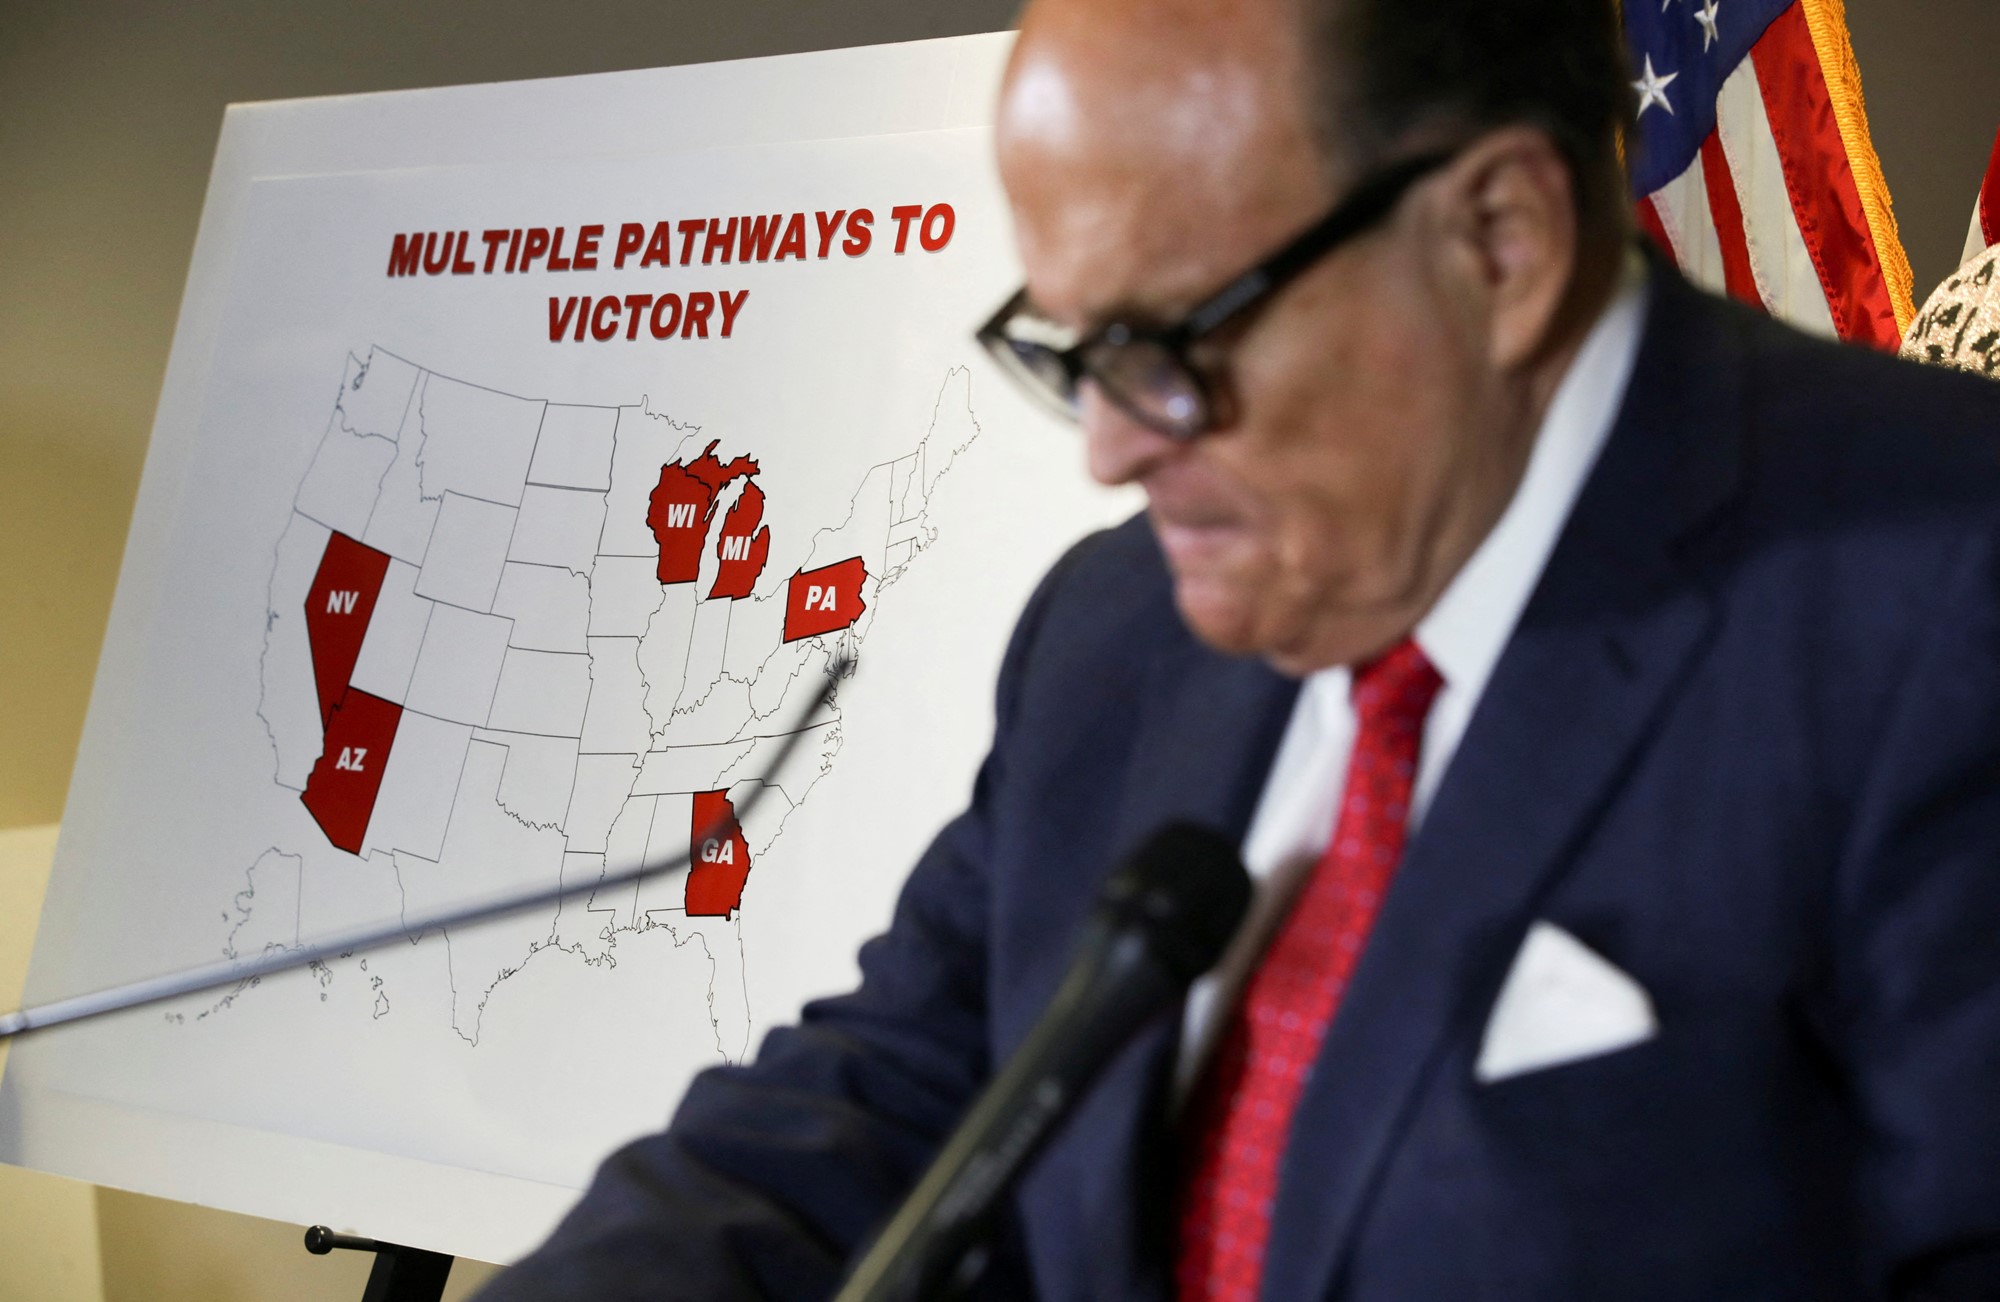 Former New York City Mayor Rudy Giuliani, personal attorney to U.S. President Donald Trump, stands in front of a map of election swing states